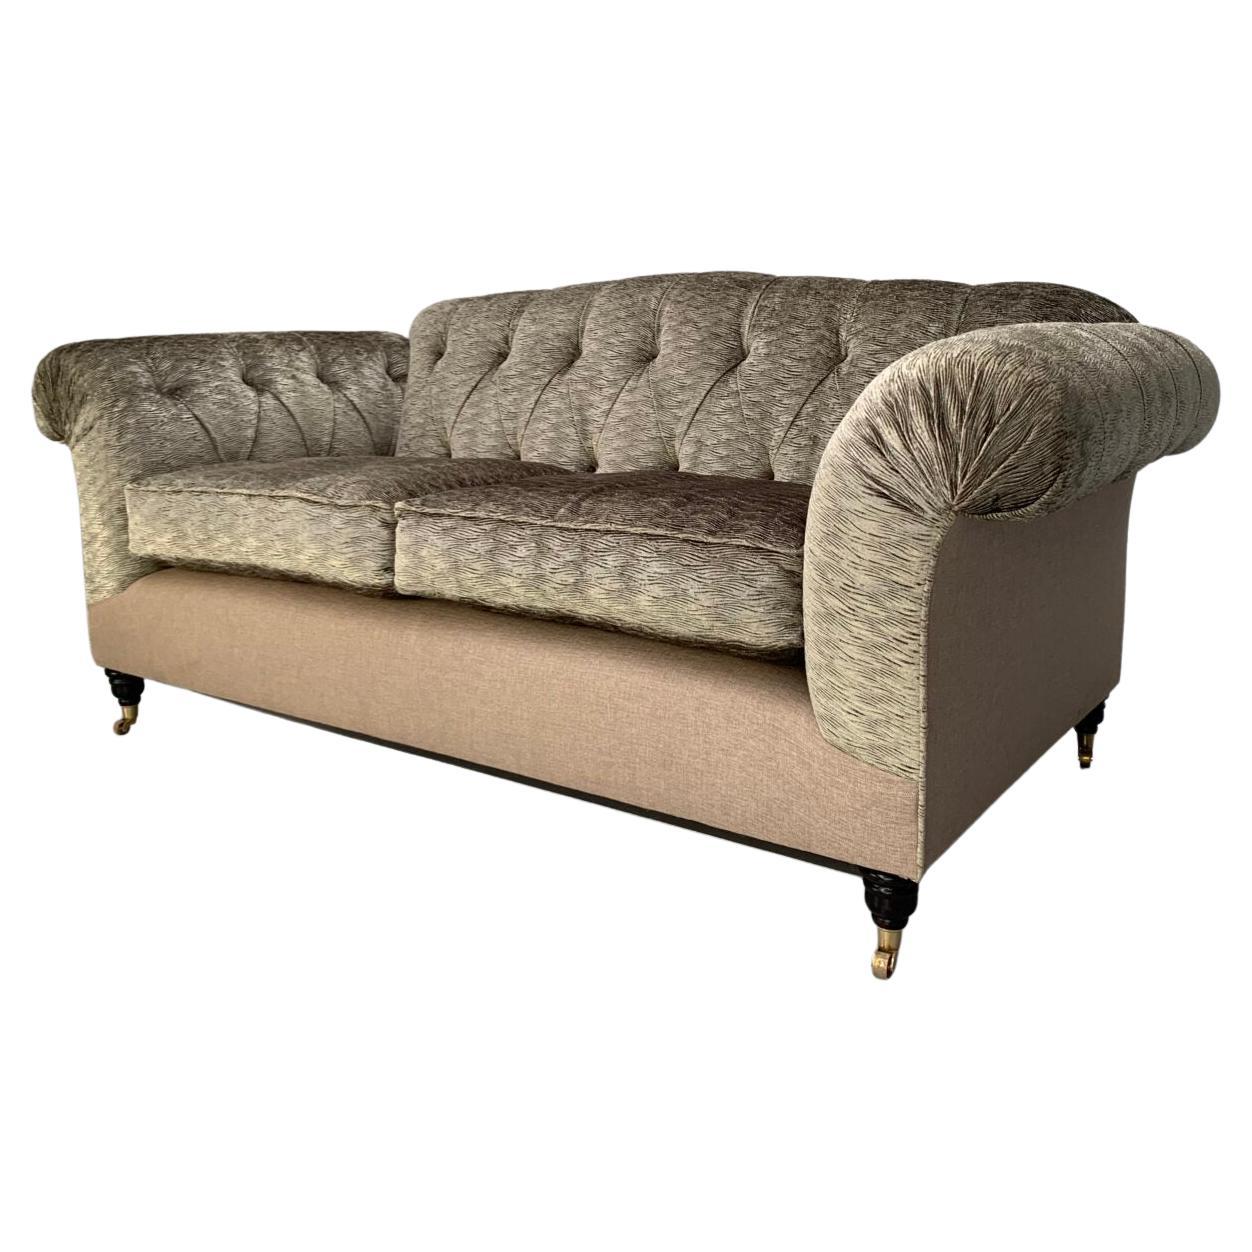 Jules Sofa with seat cushions - George Smith (US)